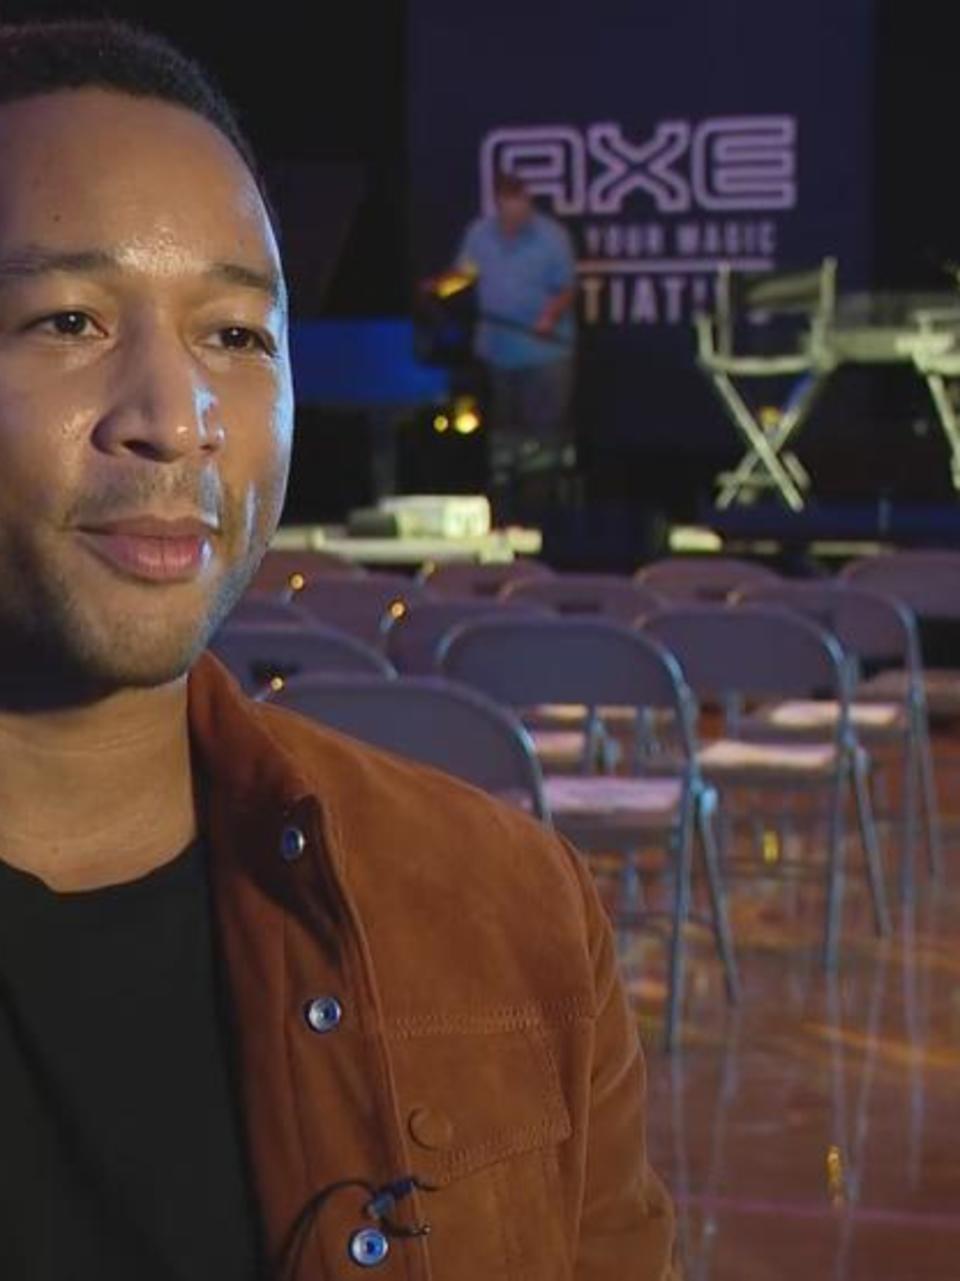 Bf 9x - Together At Home': John Legend, top artists live streaming free ...